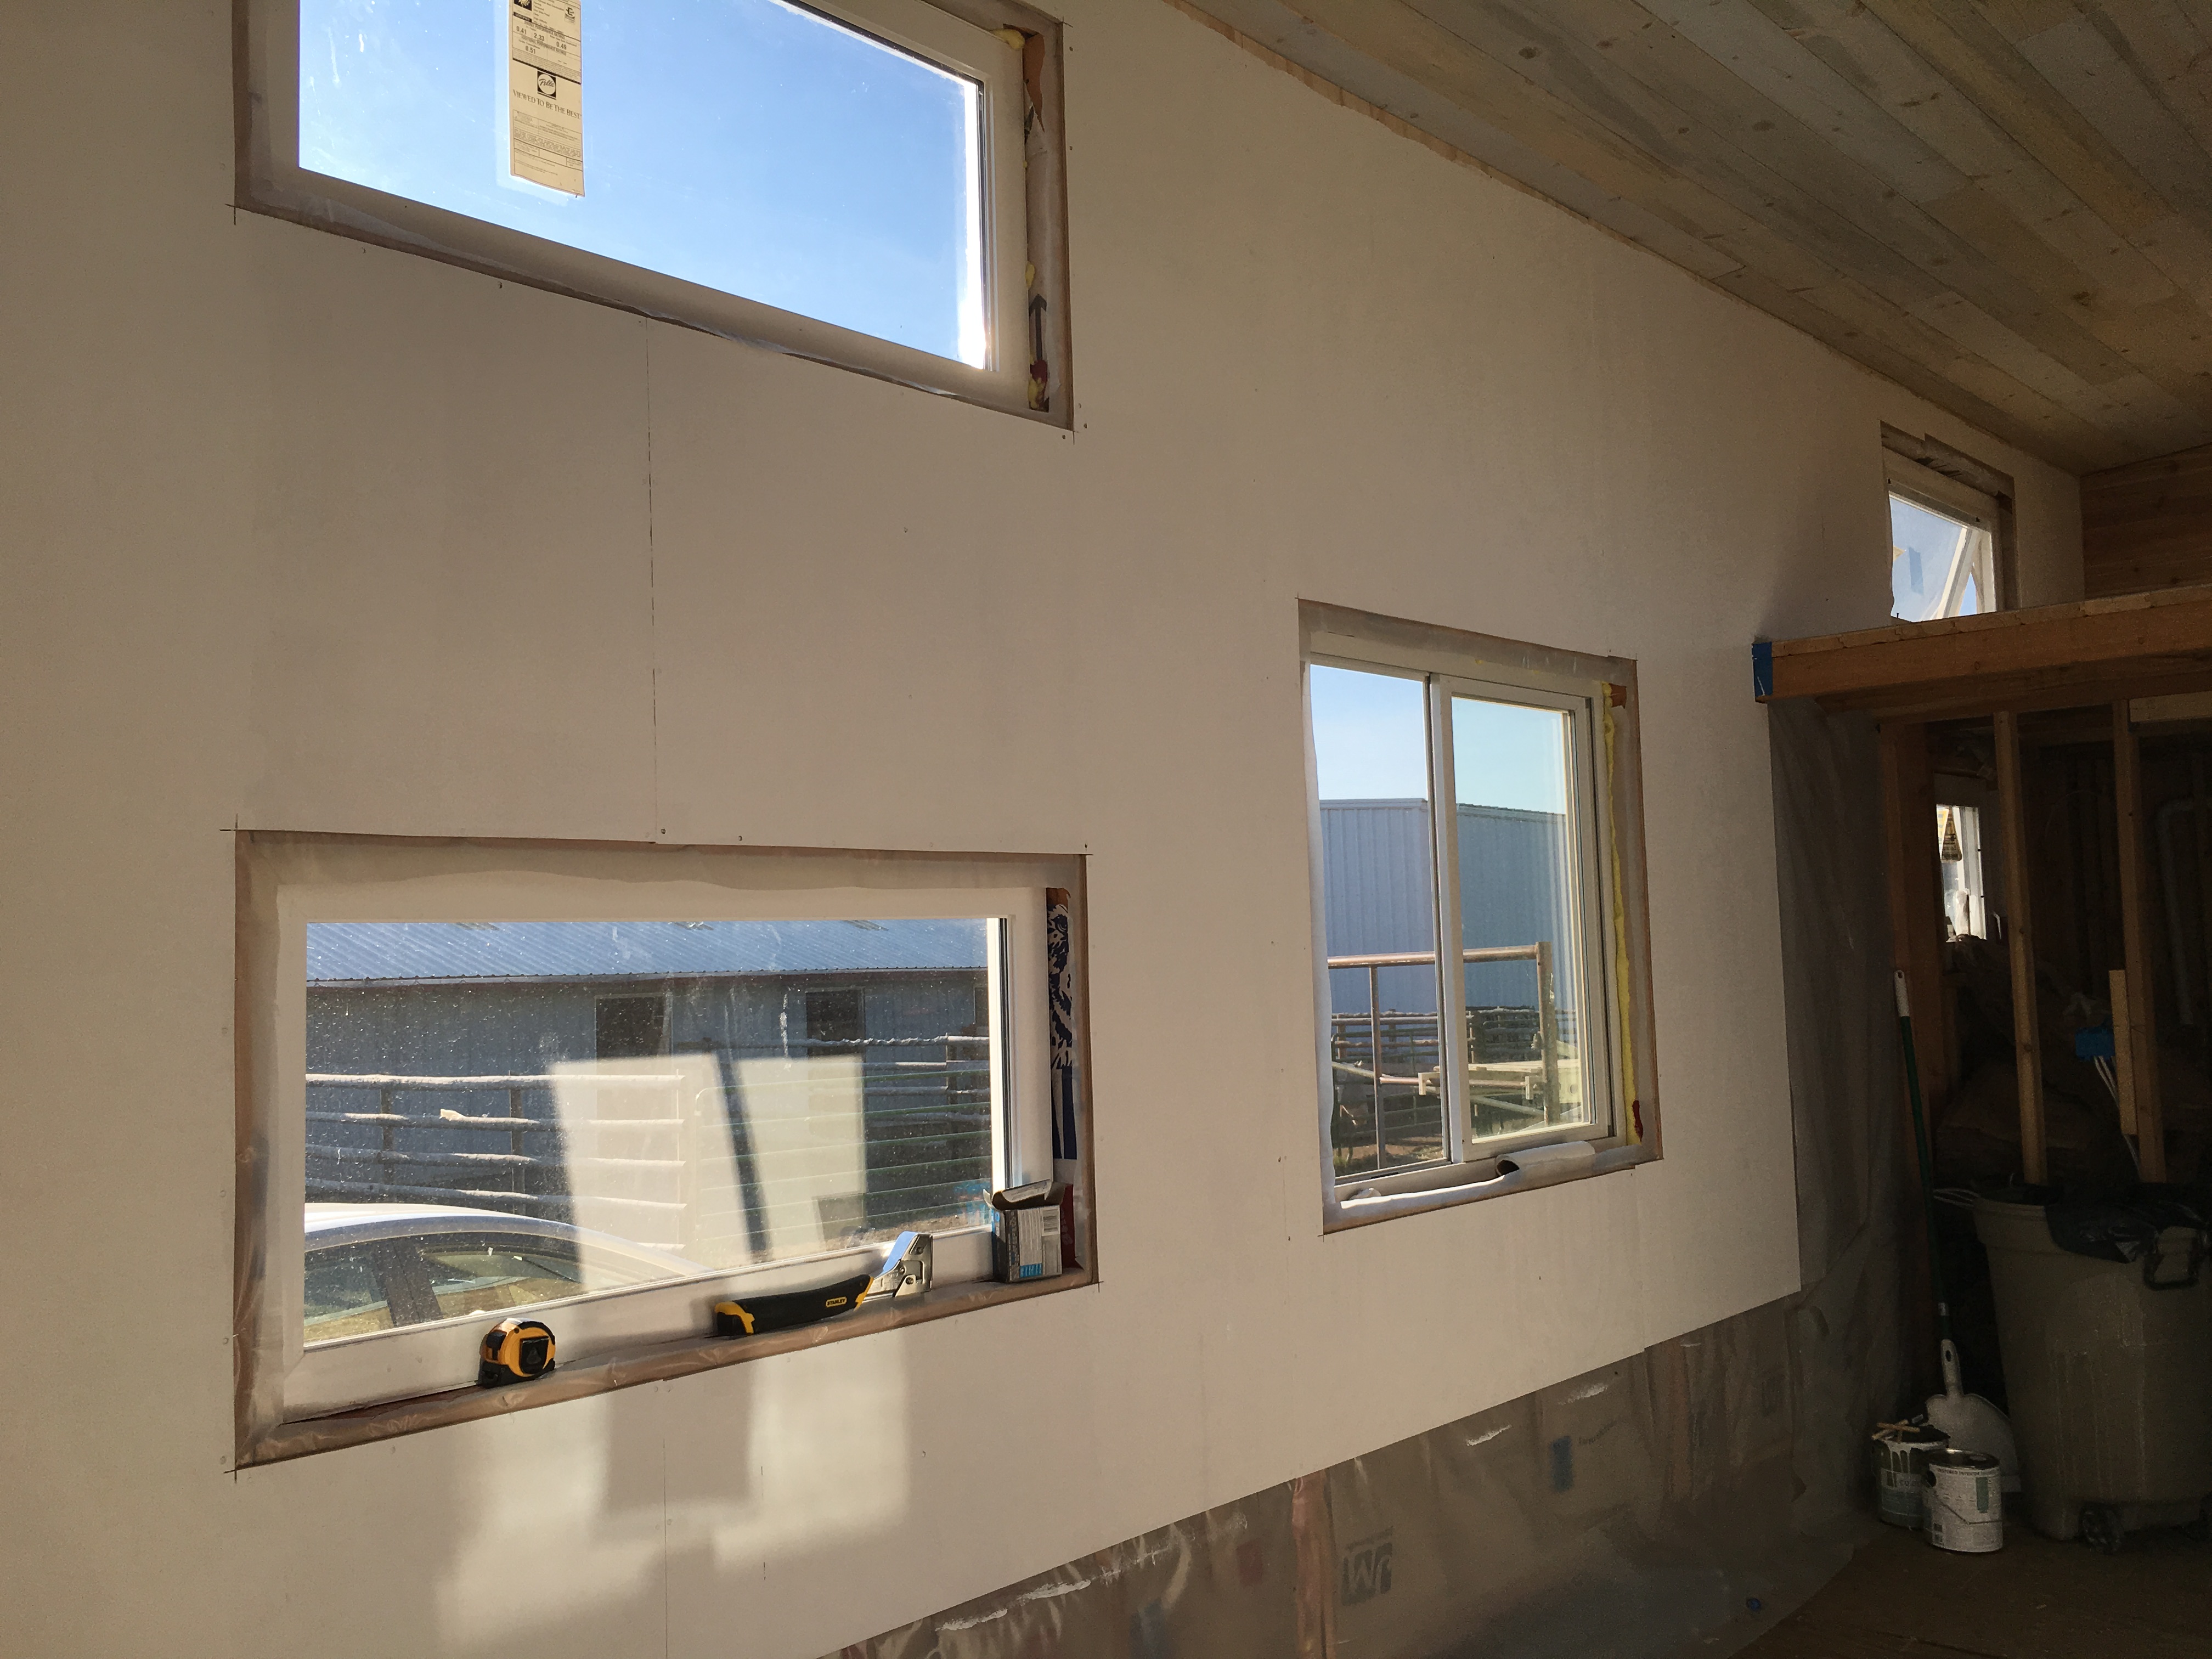 LET THERE BE LIGHT: 12 WINDOWS 1 GLASS DOOR BRING IN NATURAL LIGHT